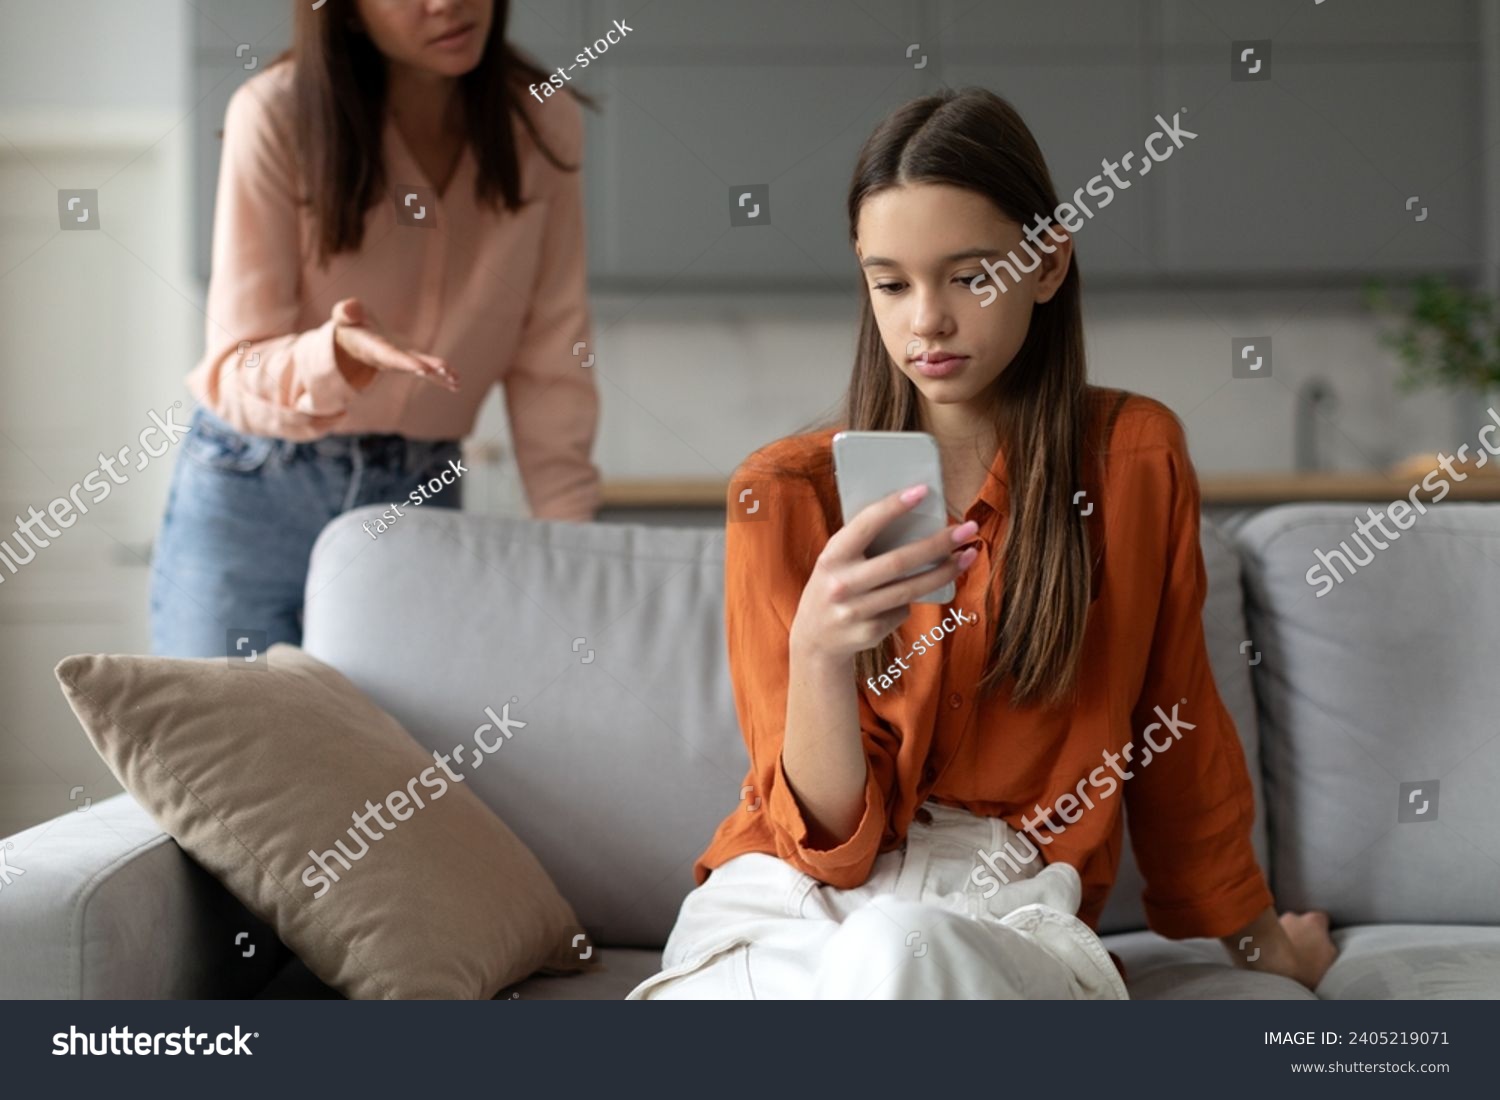 Angry mother shouting and arguing with teenage daughter over use of mobile phone, girl sitting on sofa at home, ignoring mom #2405219071